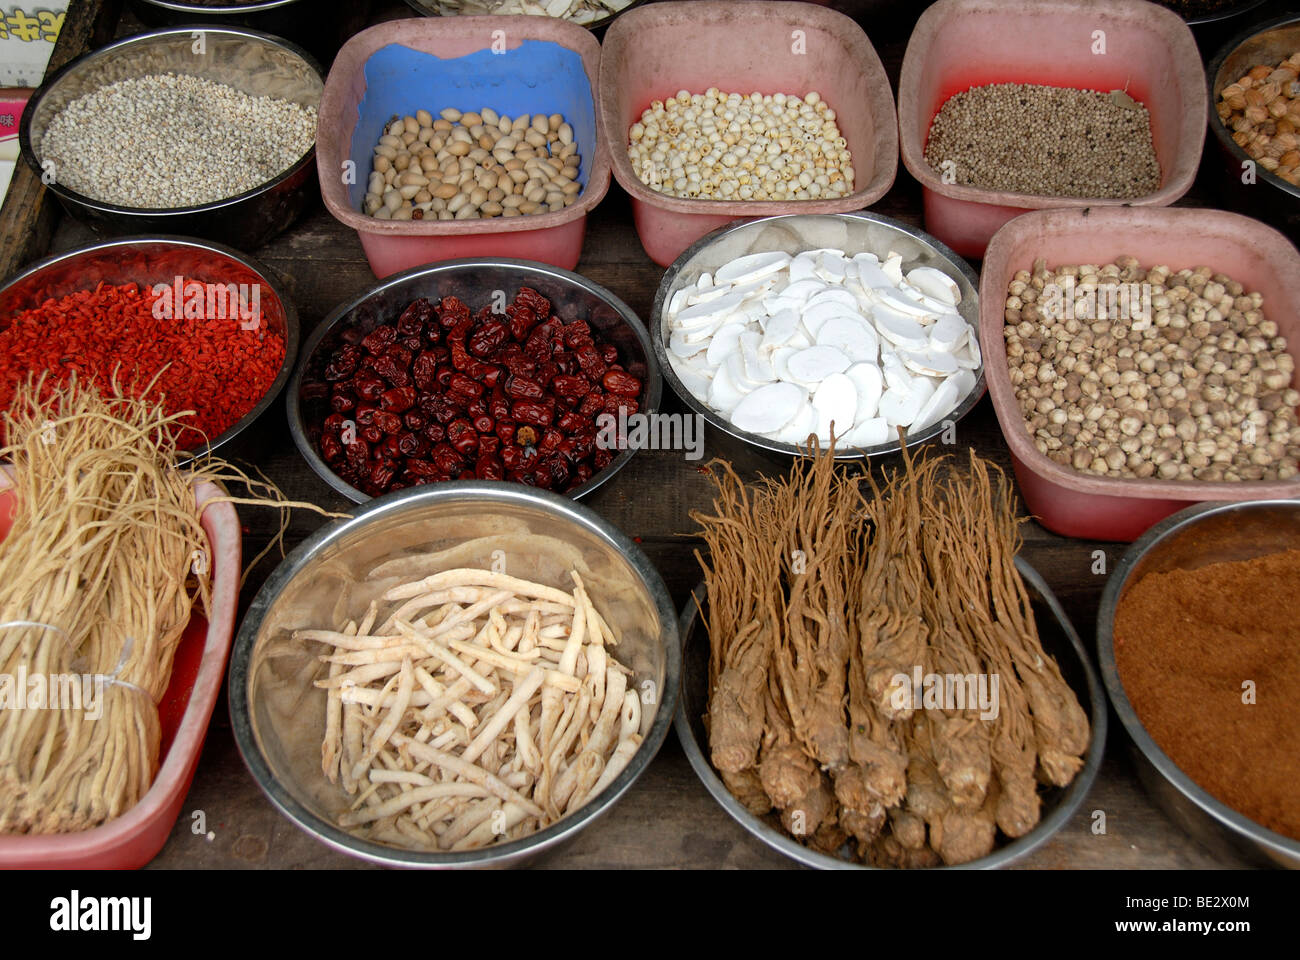 Market, produce for sale at a market stand, display, Chinese herbs and roots, Lijiang, Yunnan Province, People's Republic of Ch Stock Photo